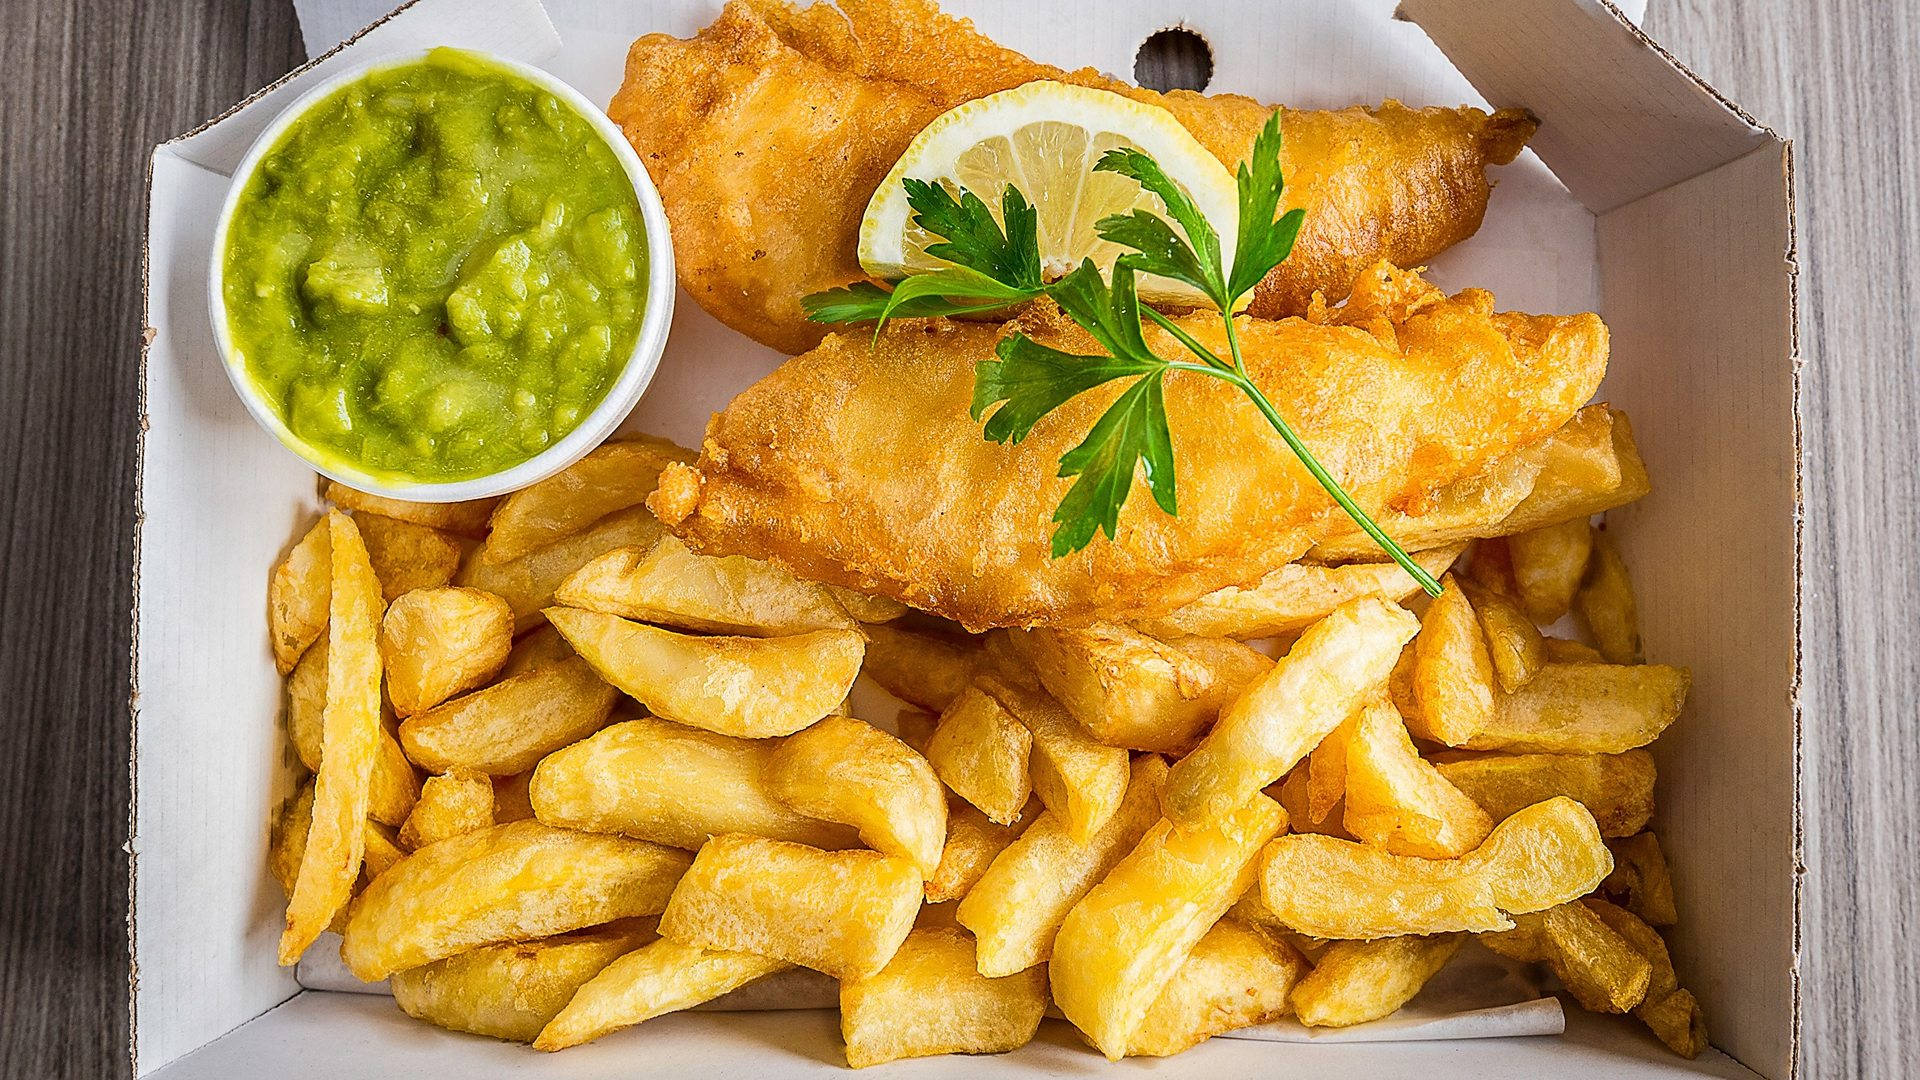 "Delicious Takeaway Box of Traditional Fish and Chips" Wallpaper